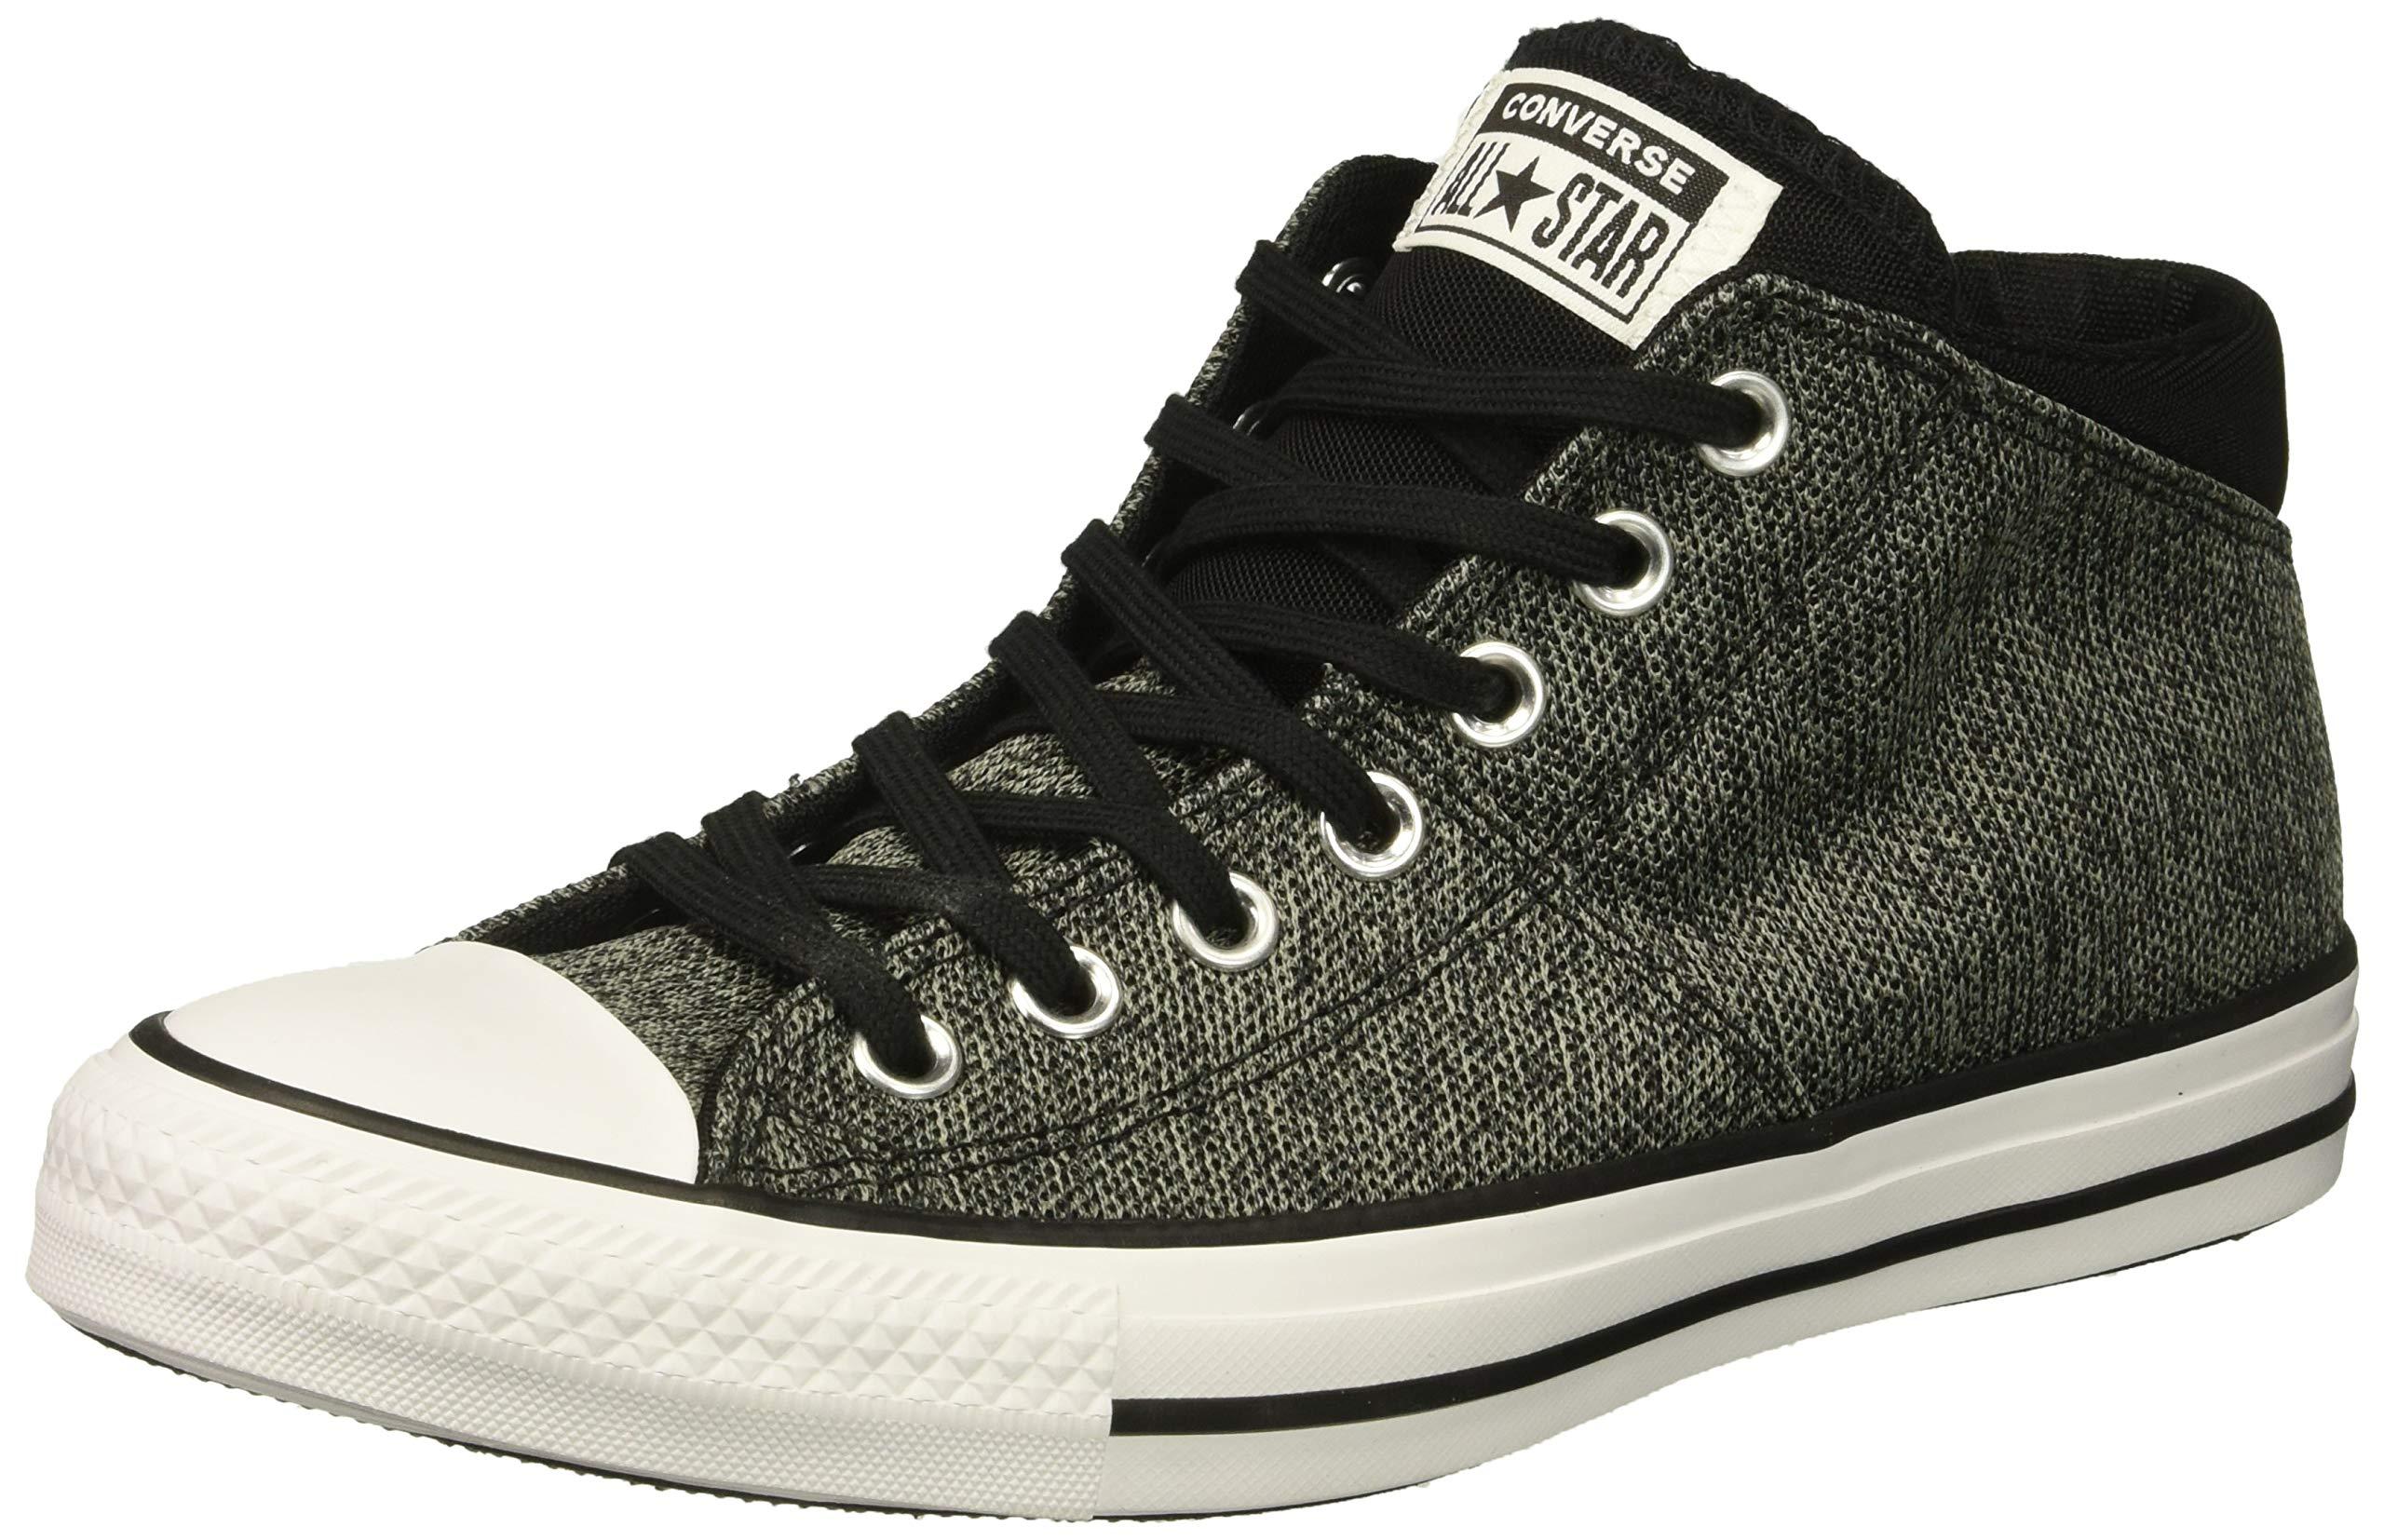 converse women's chuck taylor all star knit madison mid sneaker